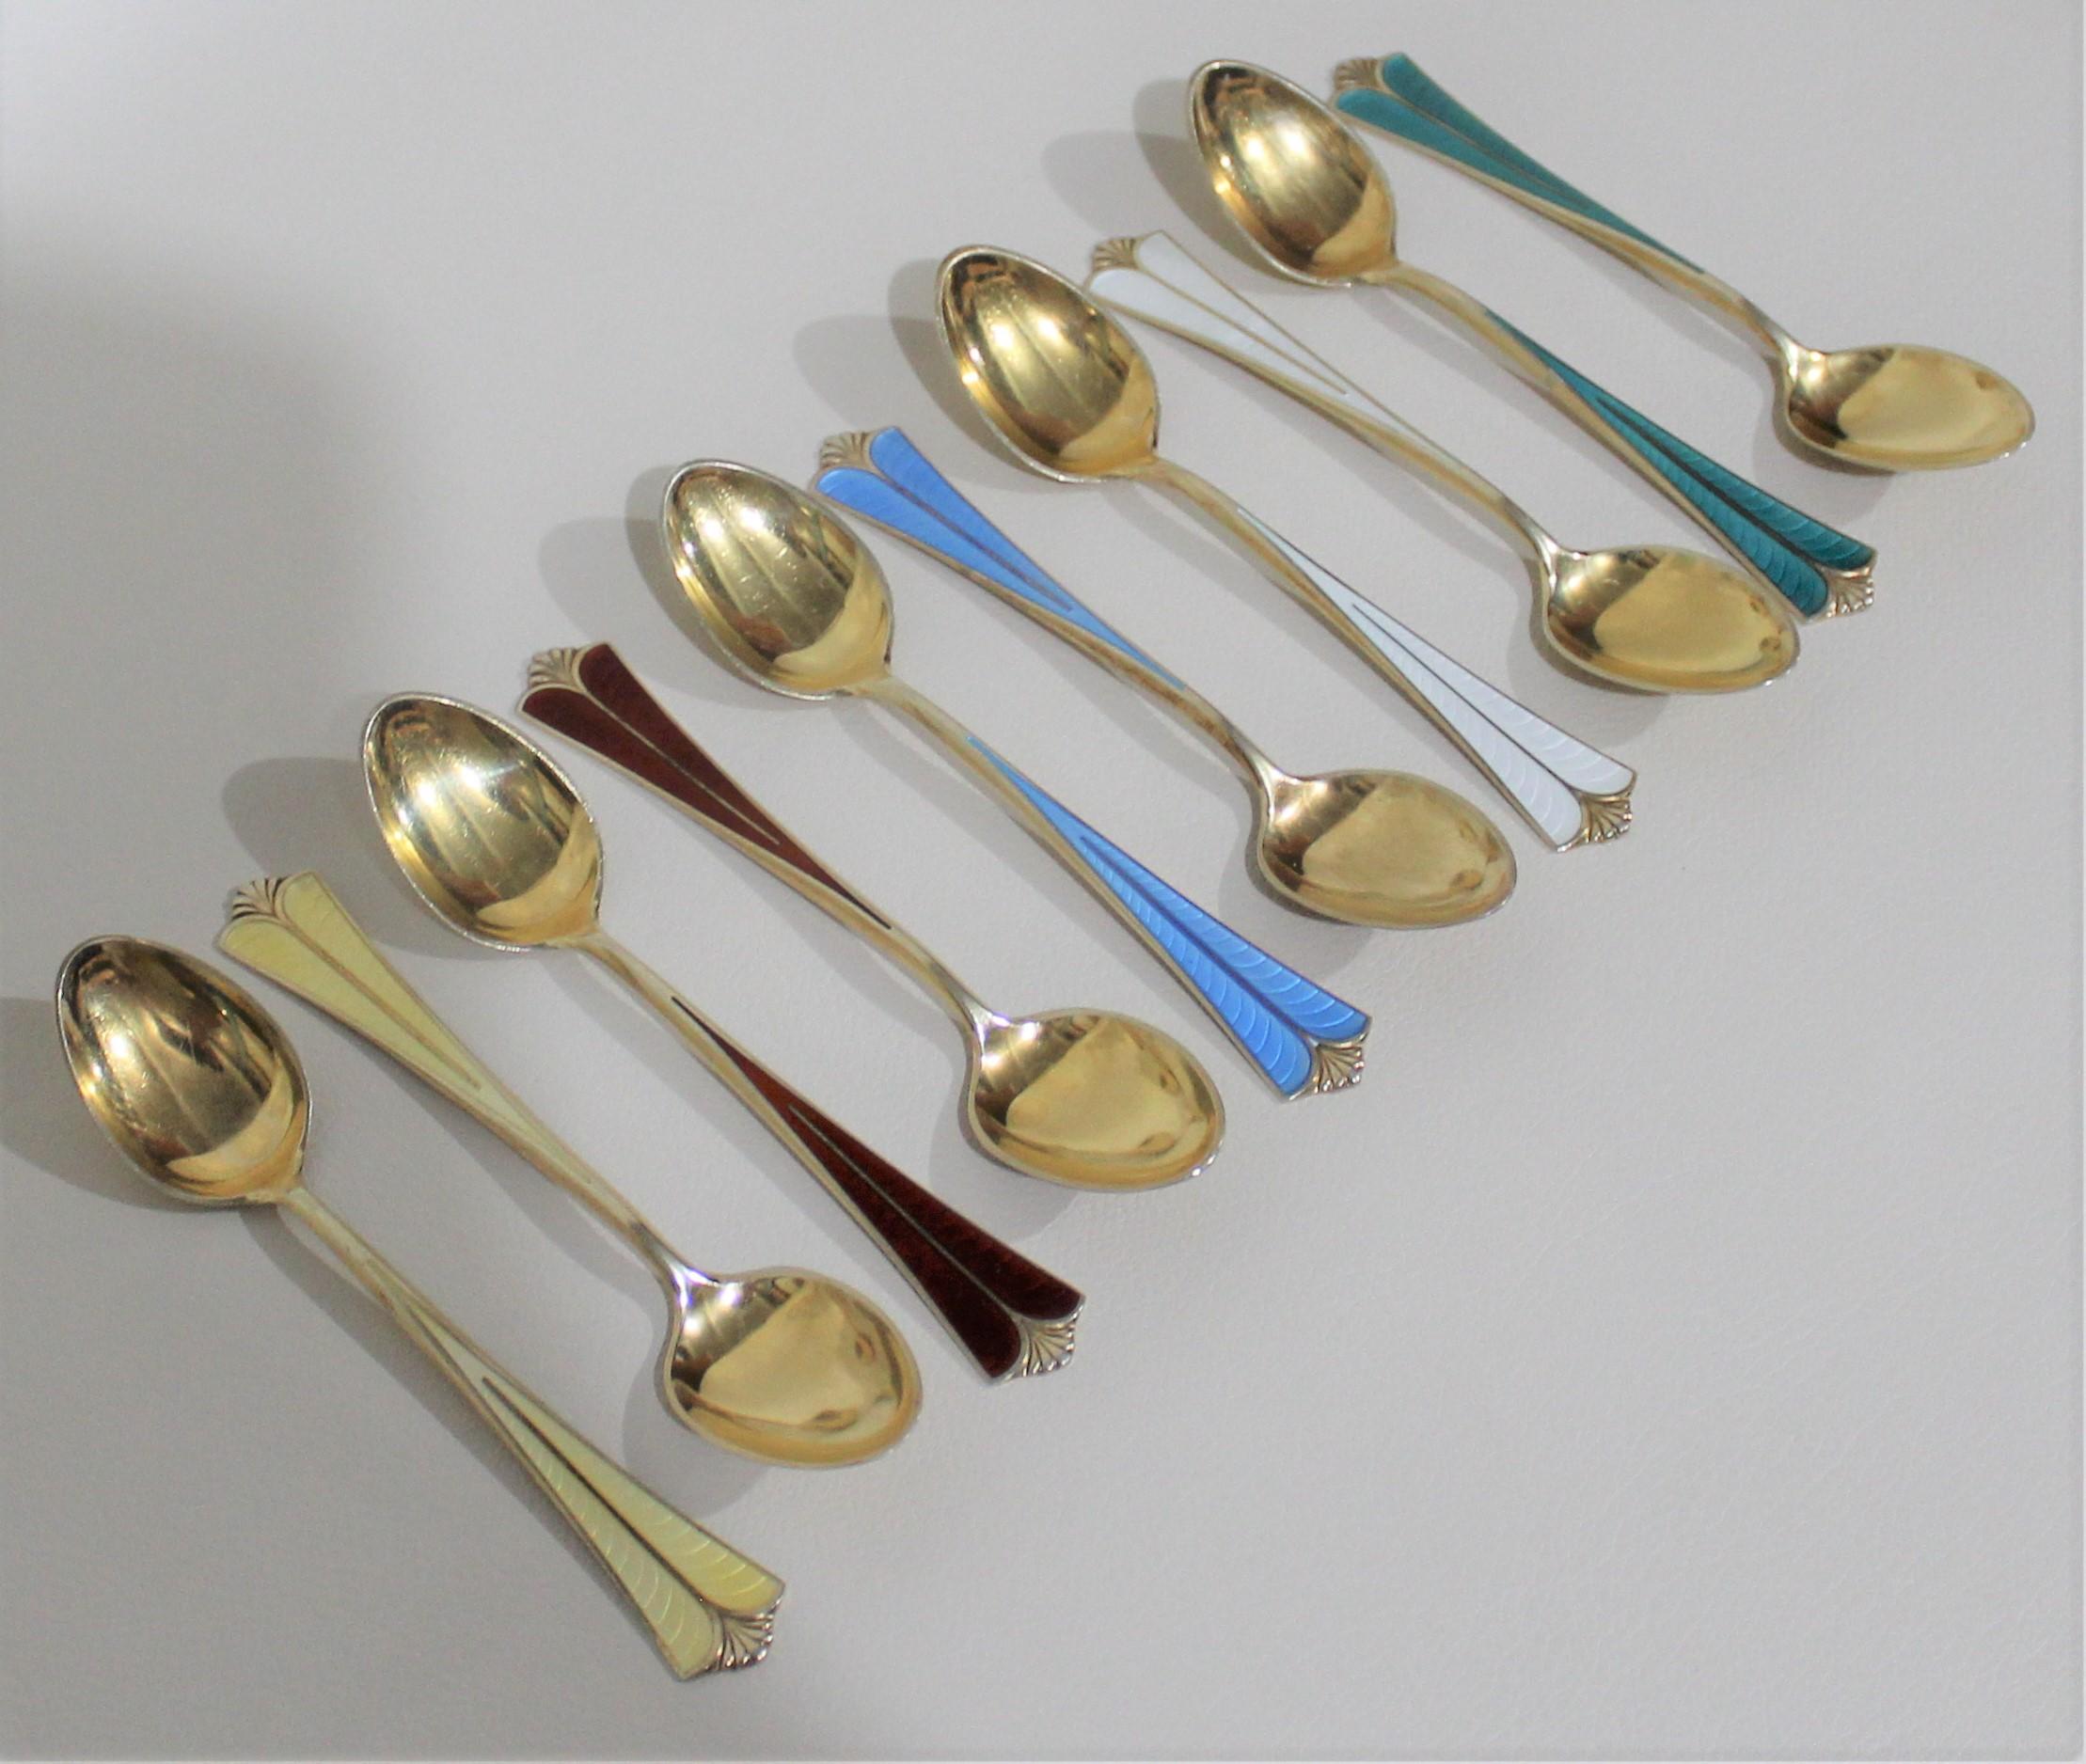 This is a beautiful set of Norwegian sterling silver spoons by David Andersen. This collection includes ten spoons with enamel inlays and are finished with a gold wash. Each piece is stamped with David-Andersen hallmarks along with “Norway –